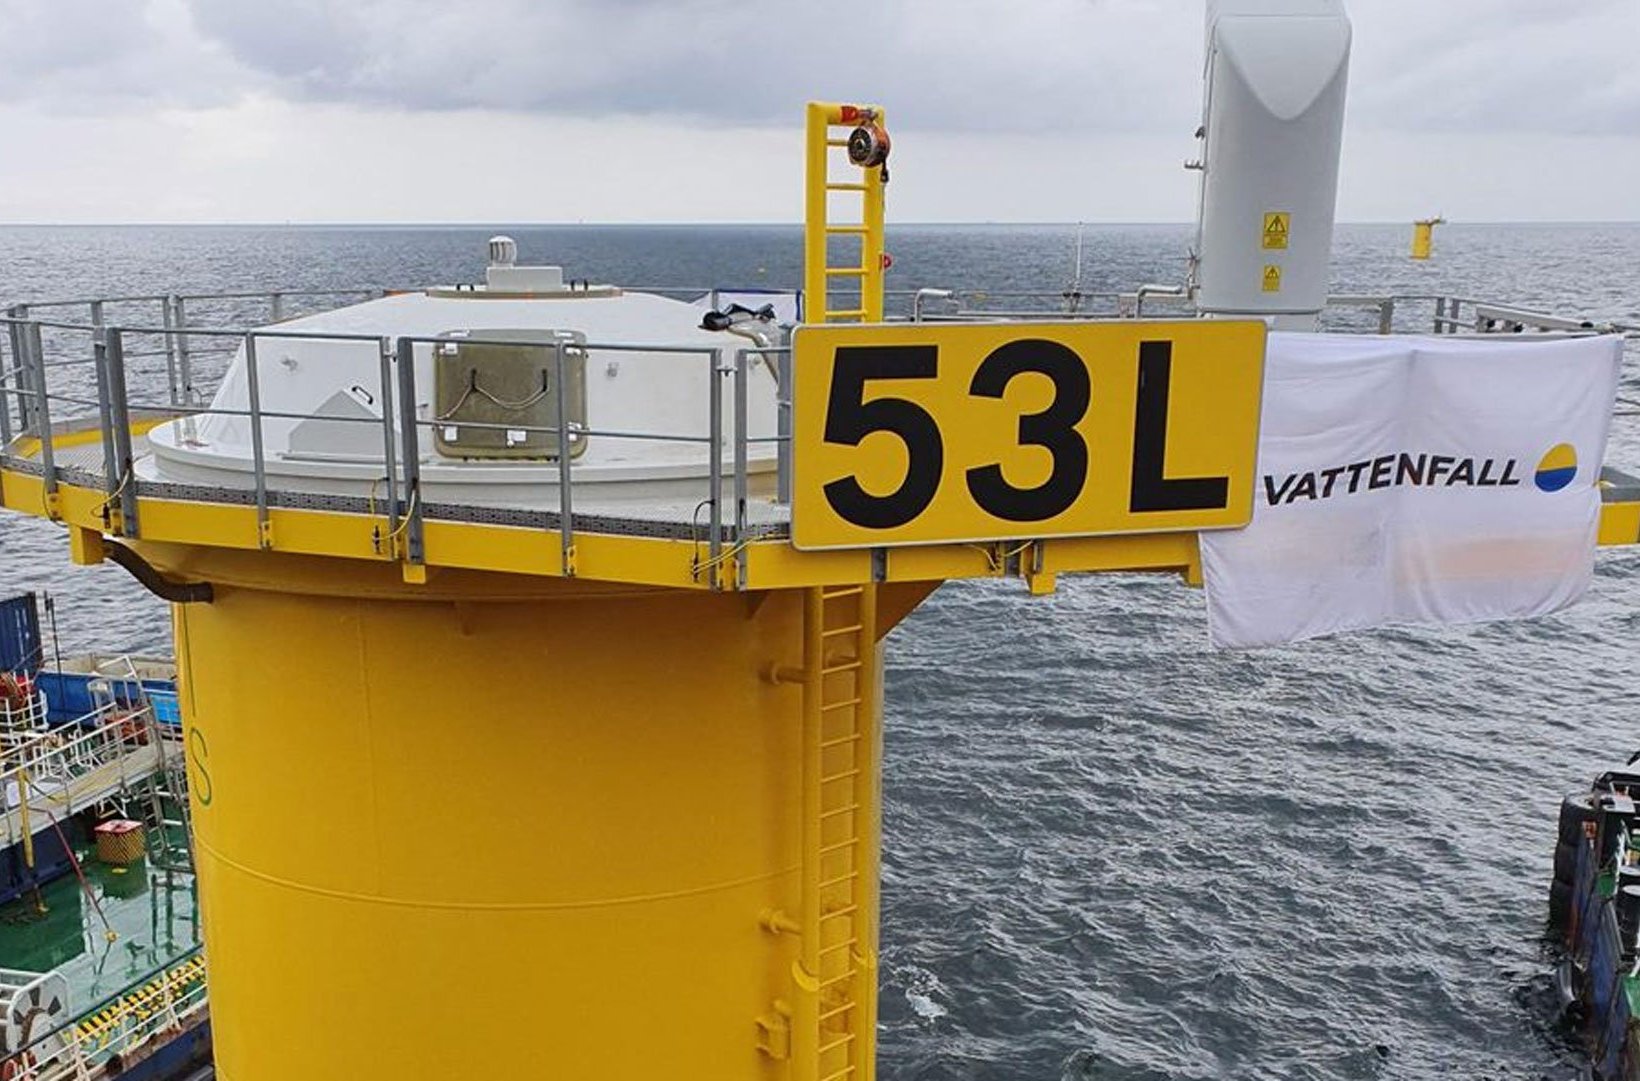 On Friday, the 72nd and last foundation for Kriegers Flak Offshore Wind Farm was successfully placed in the Baltic Sea.